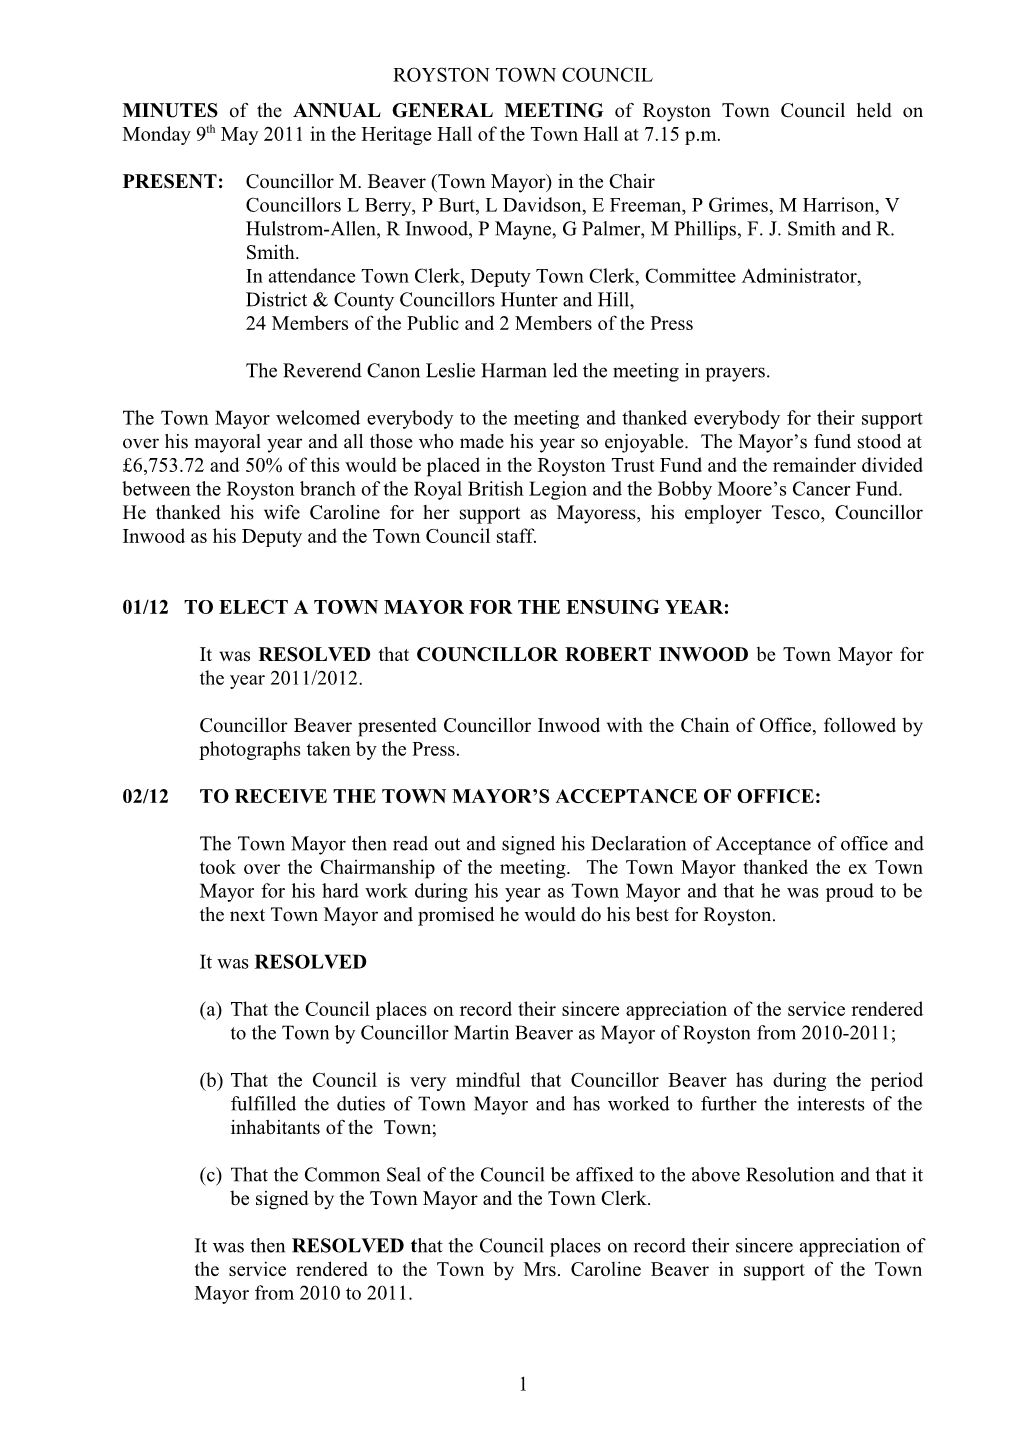 MINUTES of the ANNUAL GENERAL MEETING of Royston Town Council Held on Monday 9Th June 2011